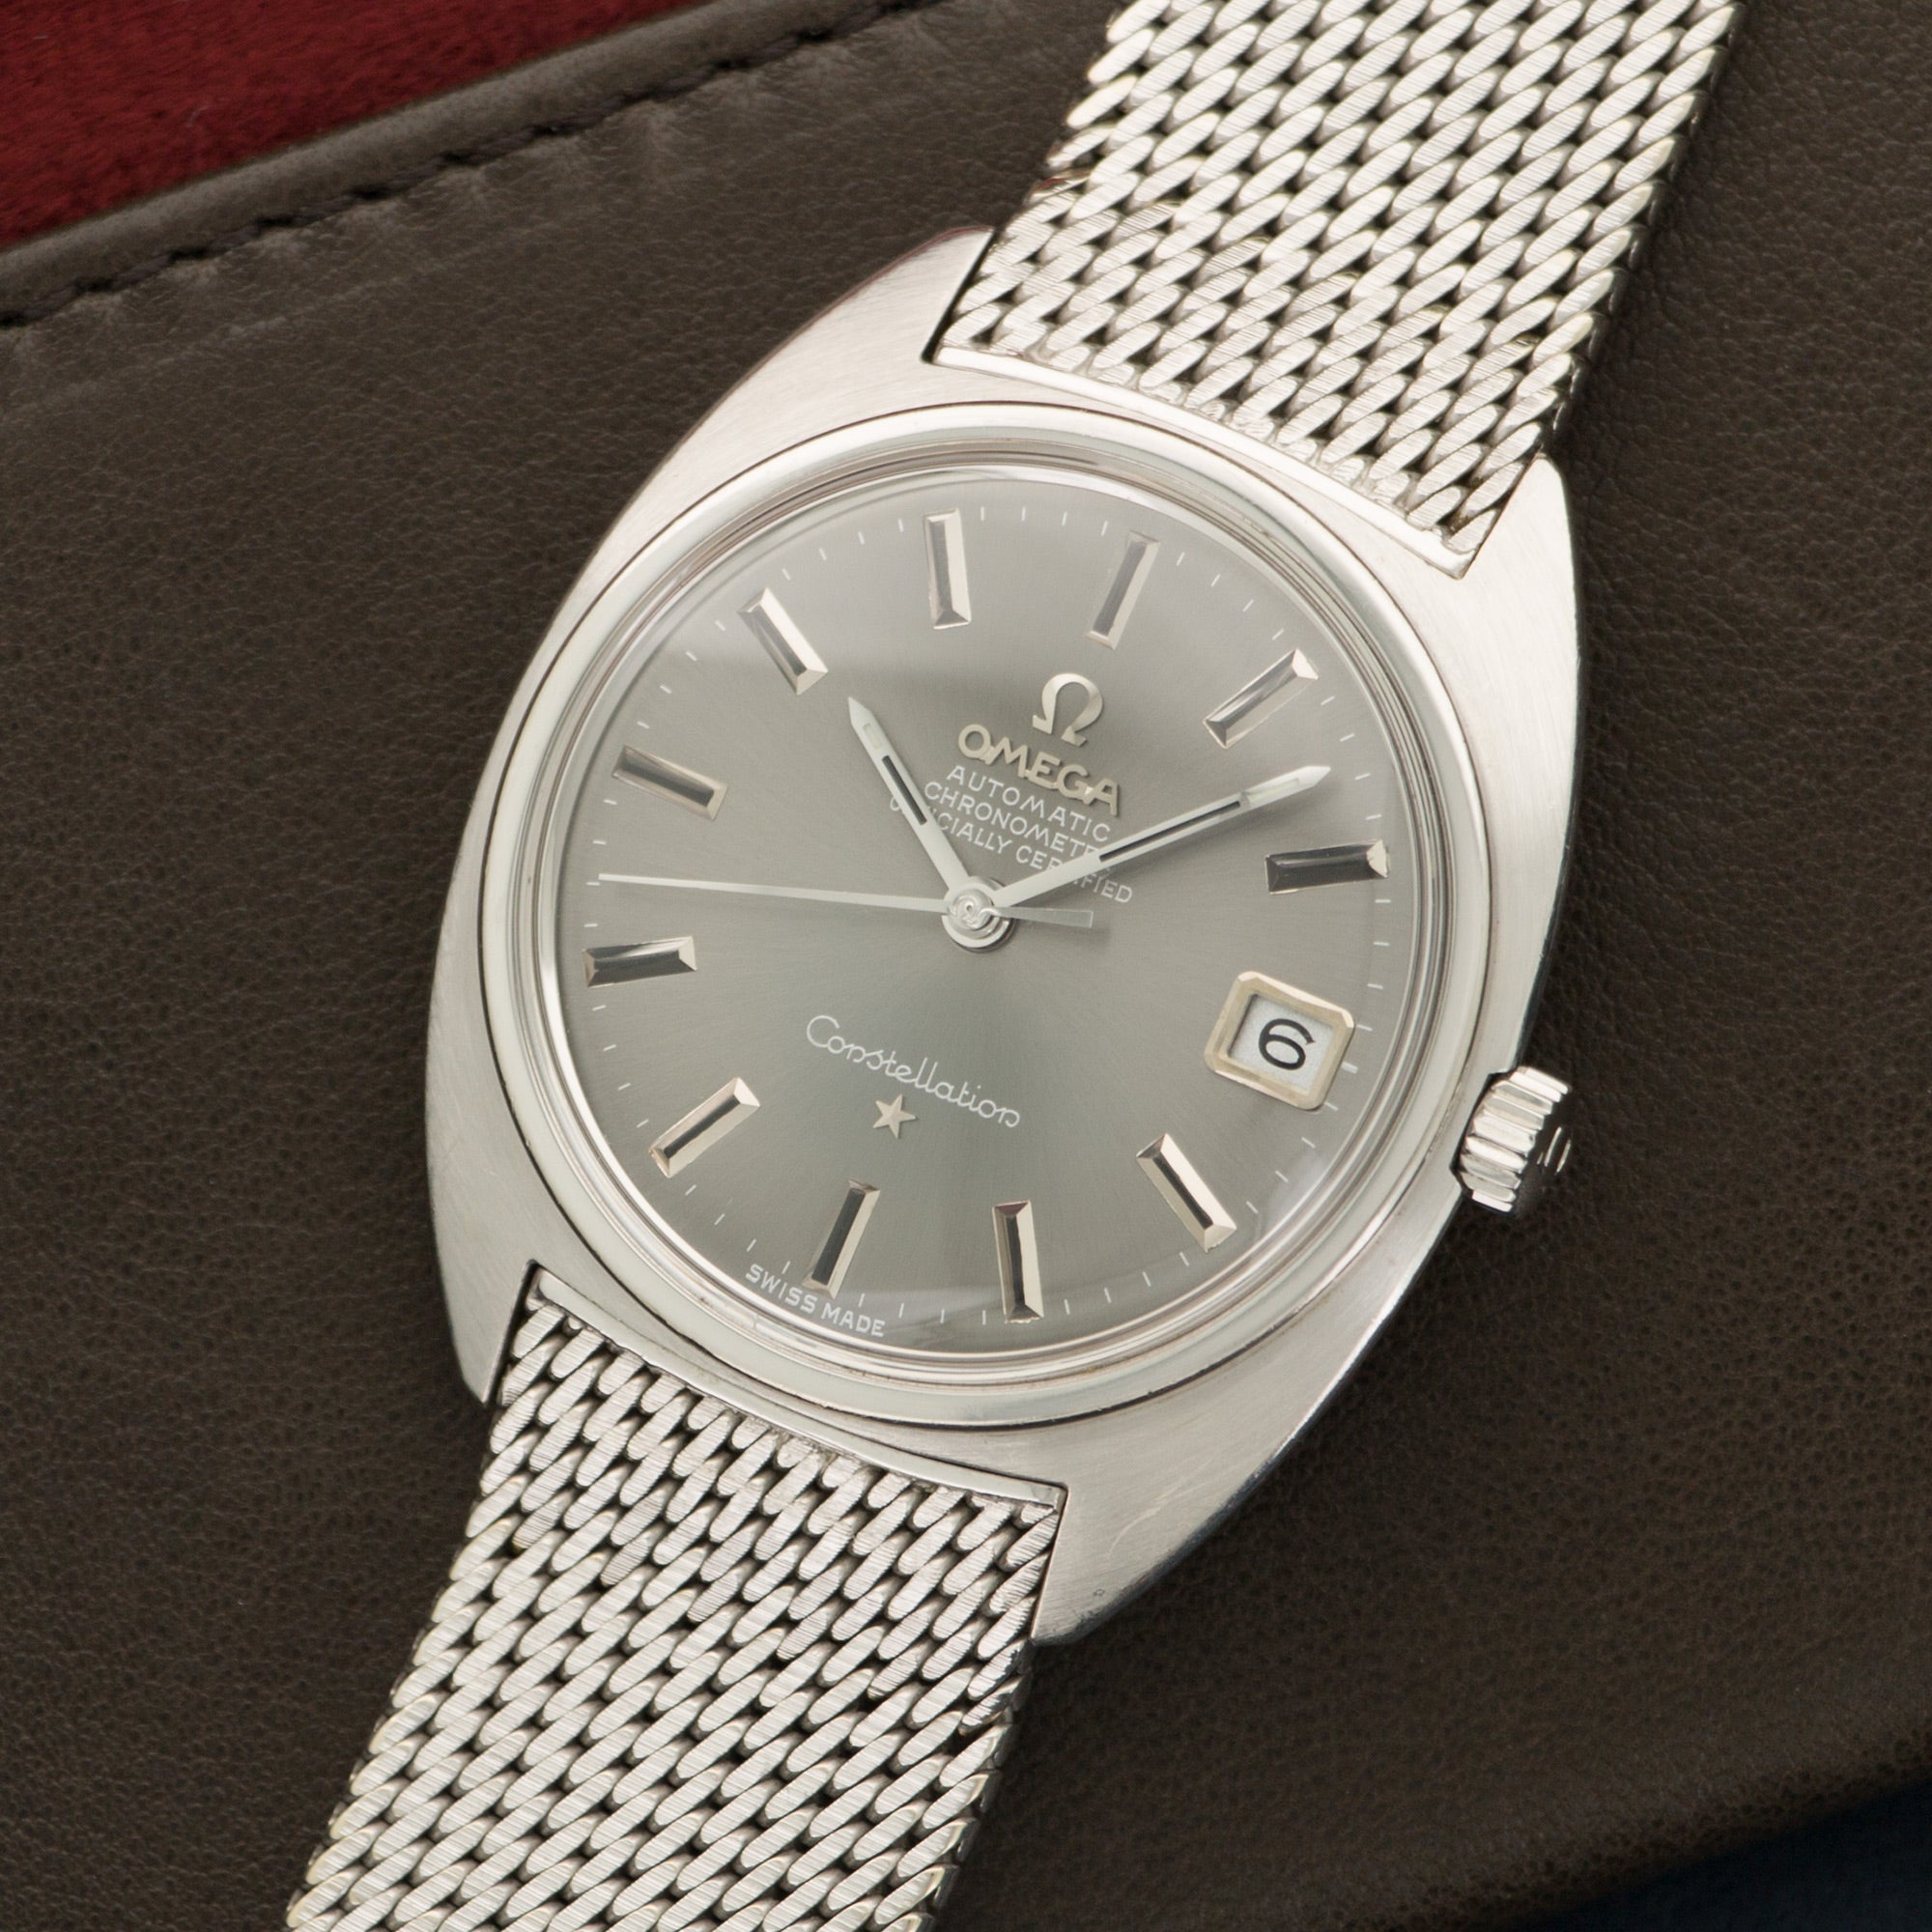 Omega - Omega White Gold C Case Constellation Automatic Watch with Original Box - The Keystone Watches